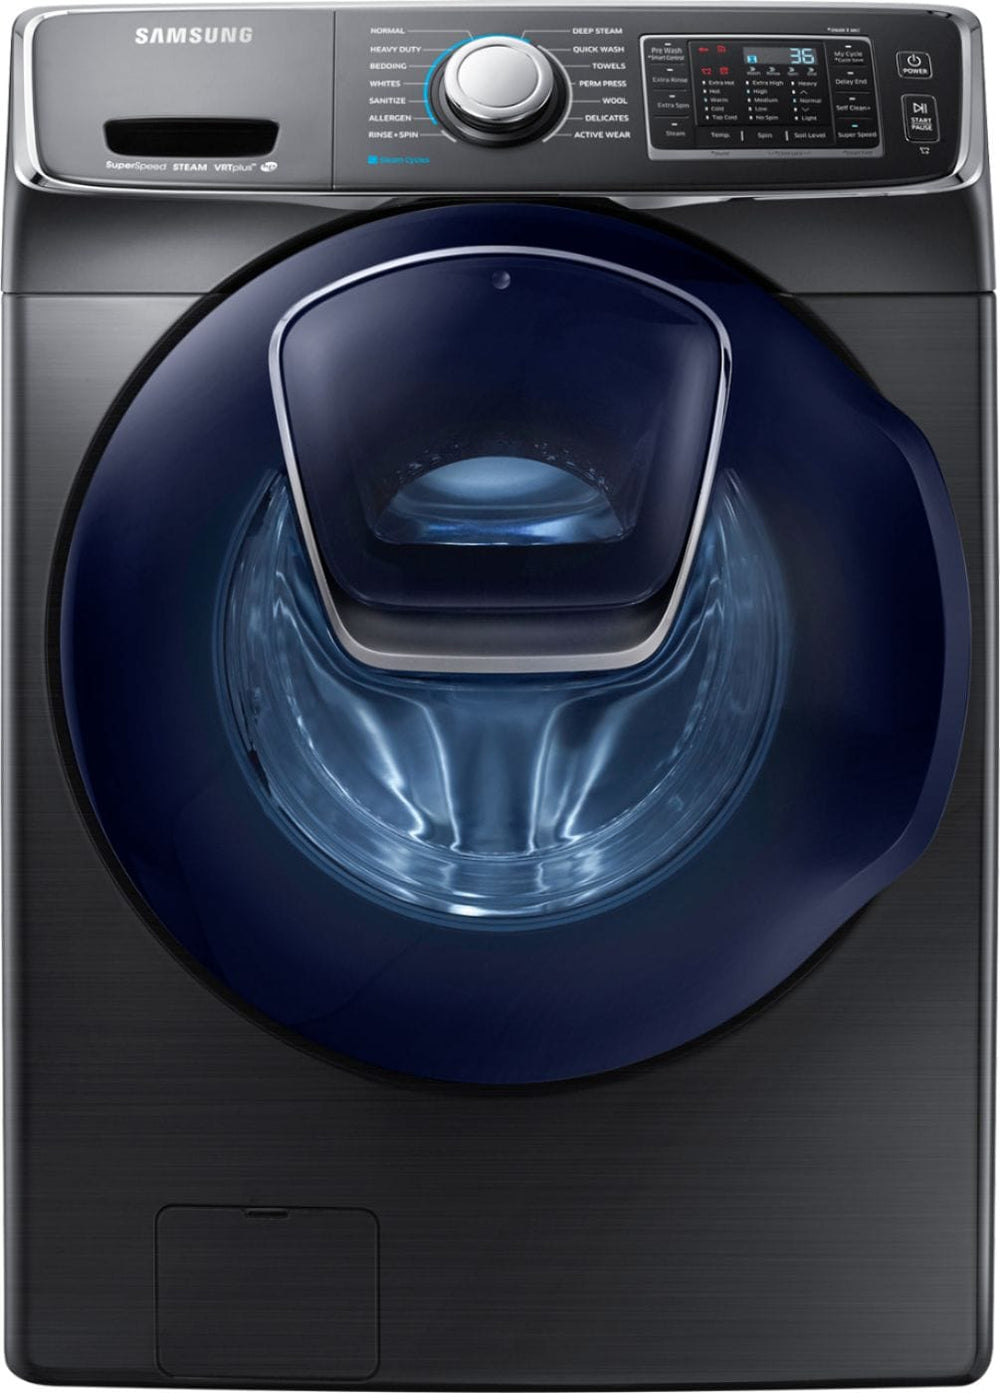 Samsung - 4.5 Cu. Ft. High Efficiency Stackable Front Load Washer with Steam and AddWash - Black stainless steel_1